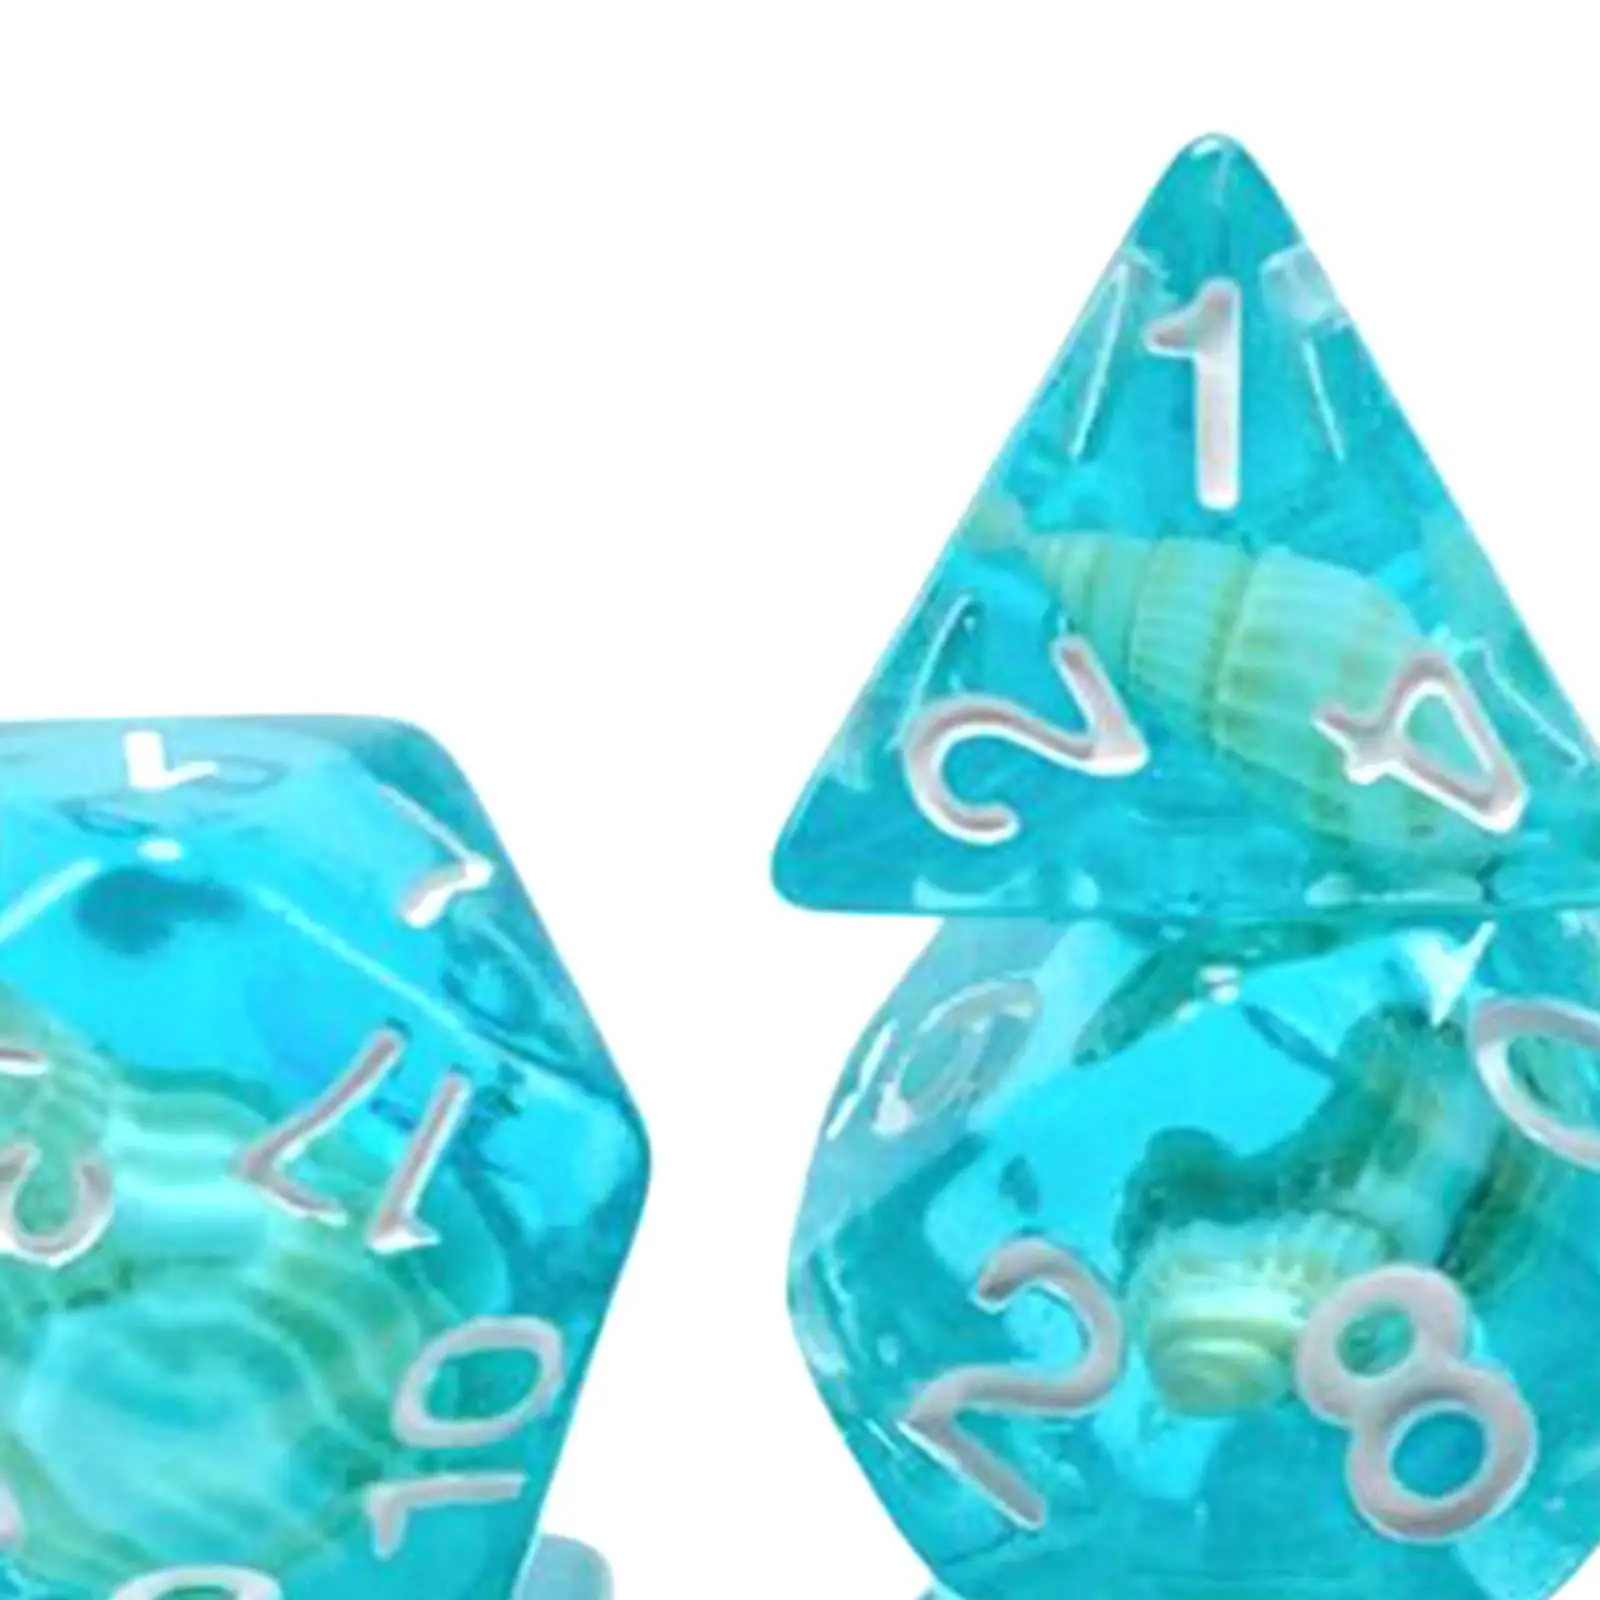 7 Pieces Dice Set, Translucent Colors Game Dice,Polyhedron Dices for Table Games